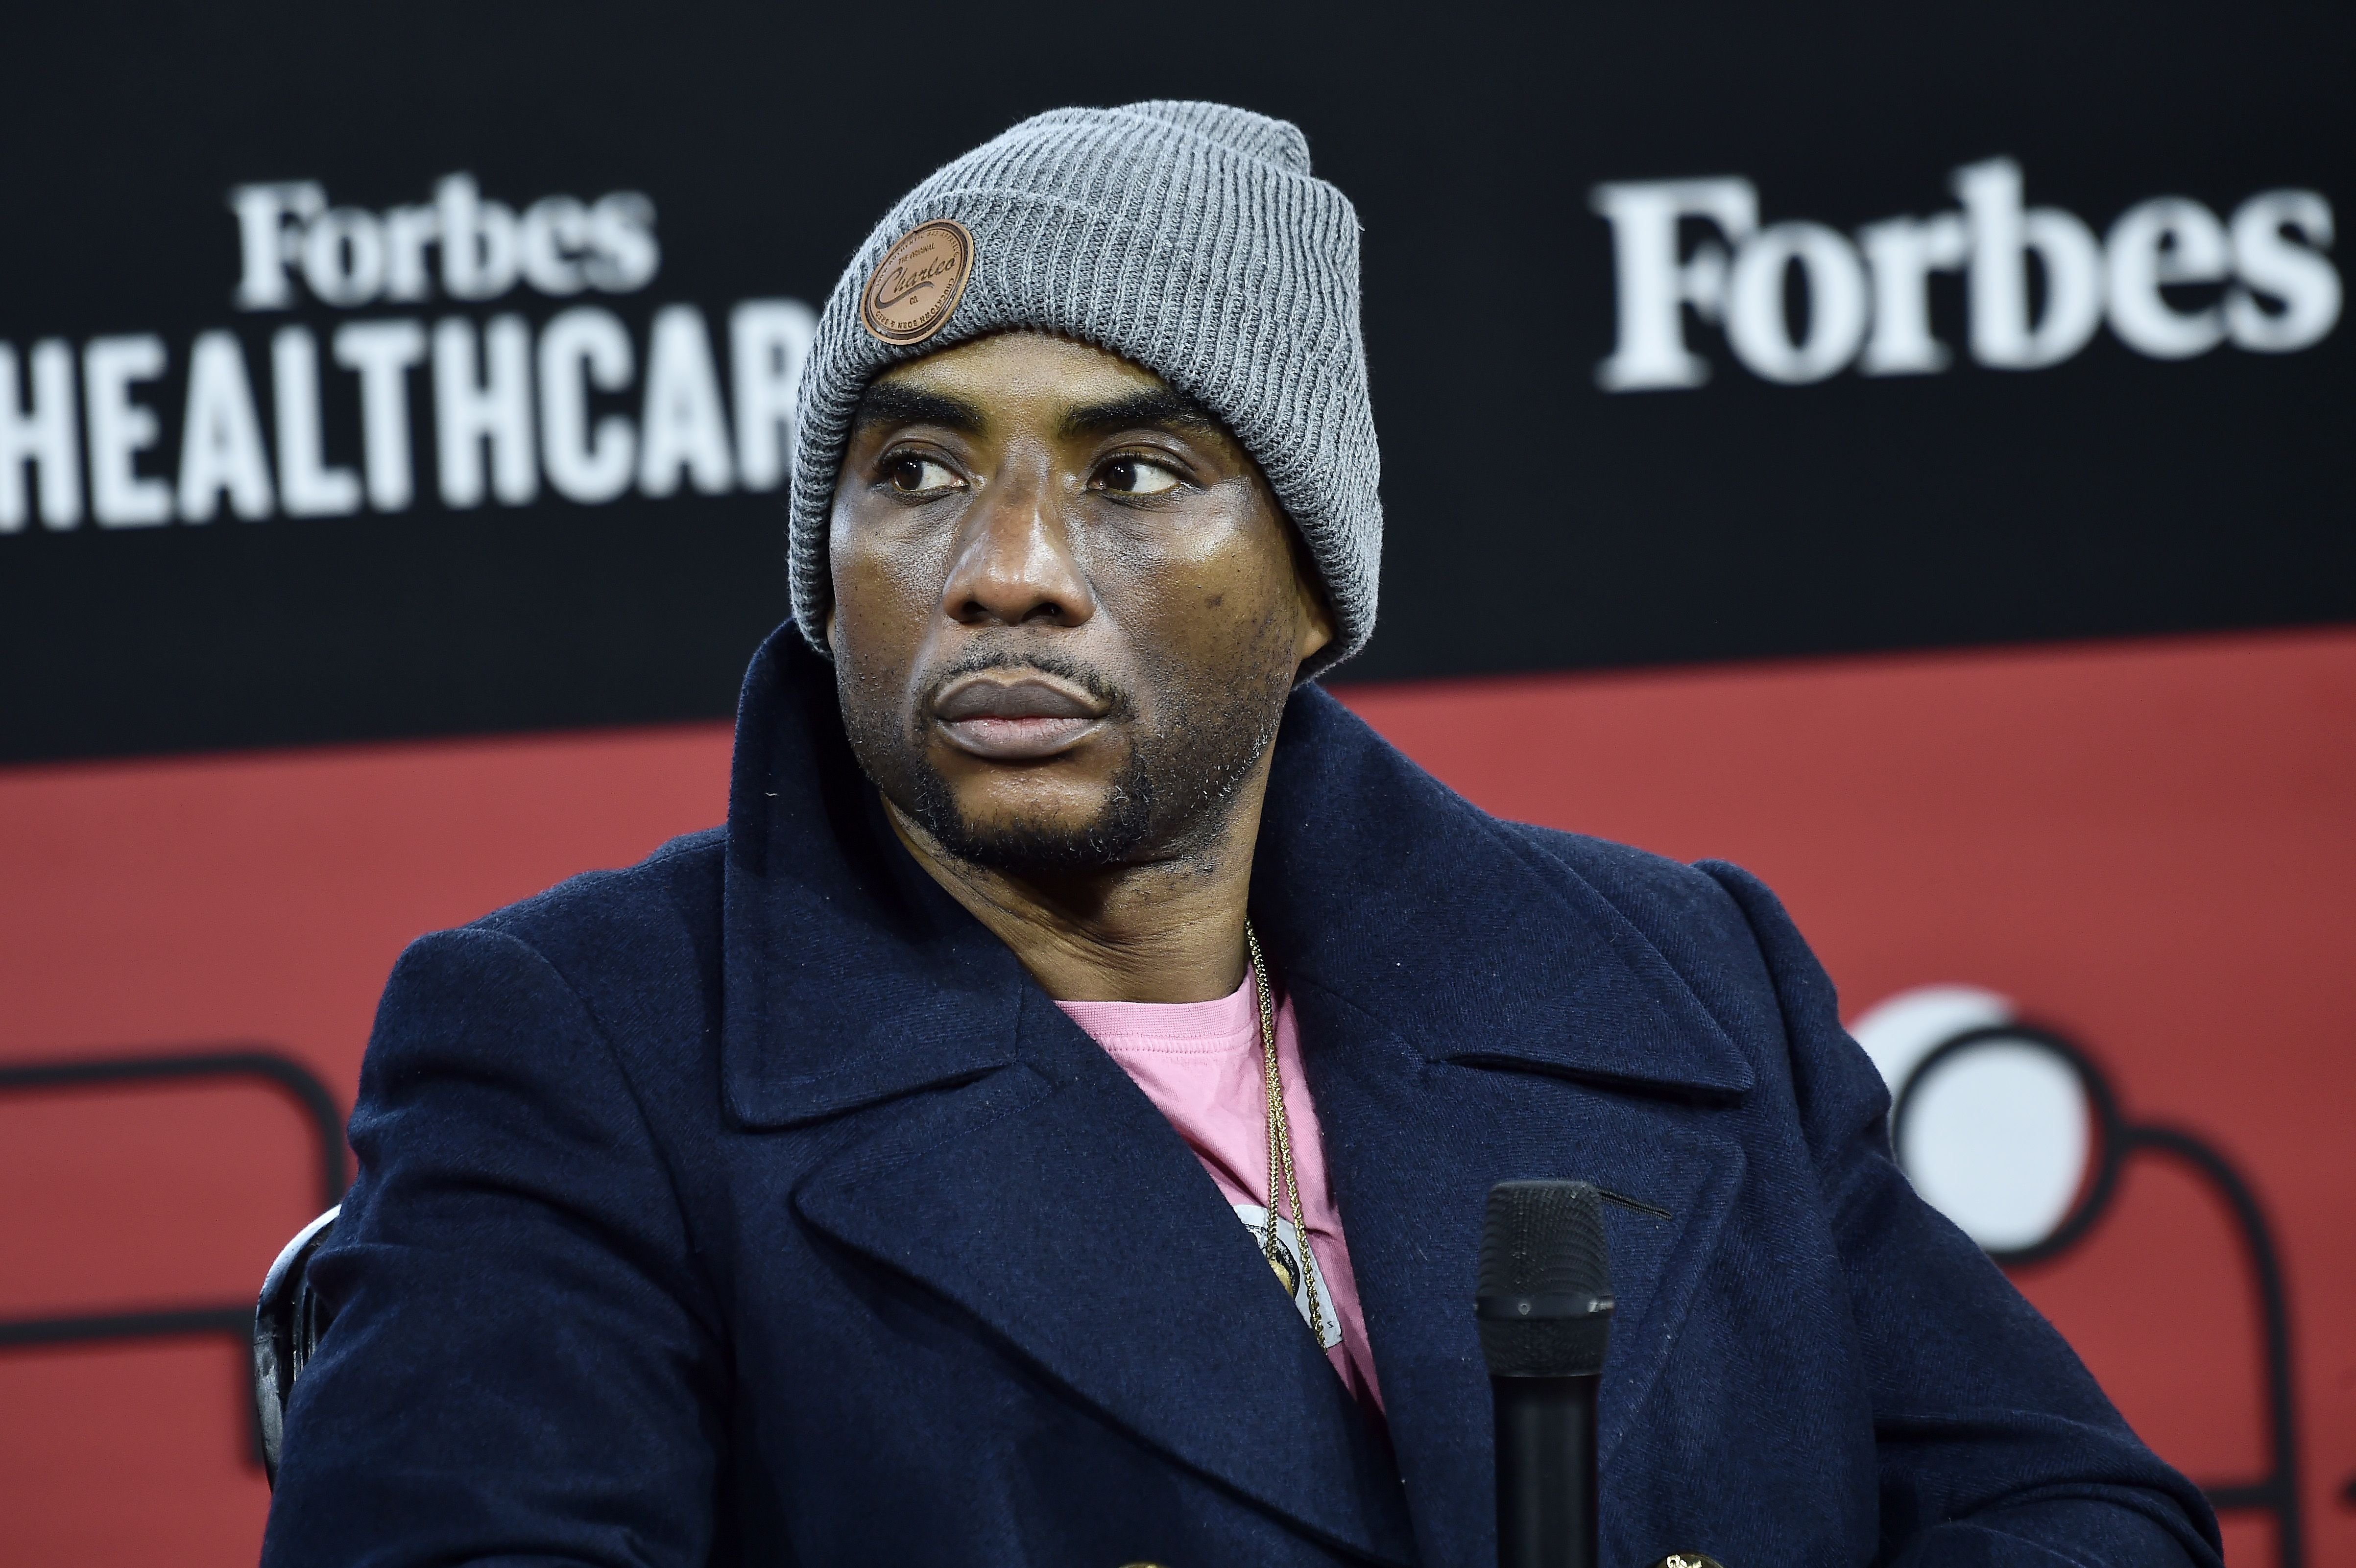 Charlamagne tha God attends at the 2019 Forbes Healthcare Summit in New York City | Source: Getty Images